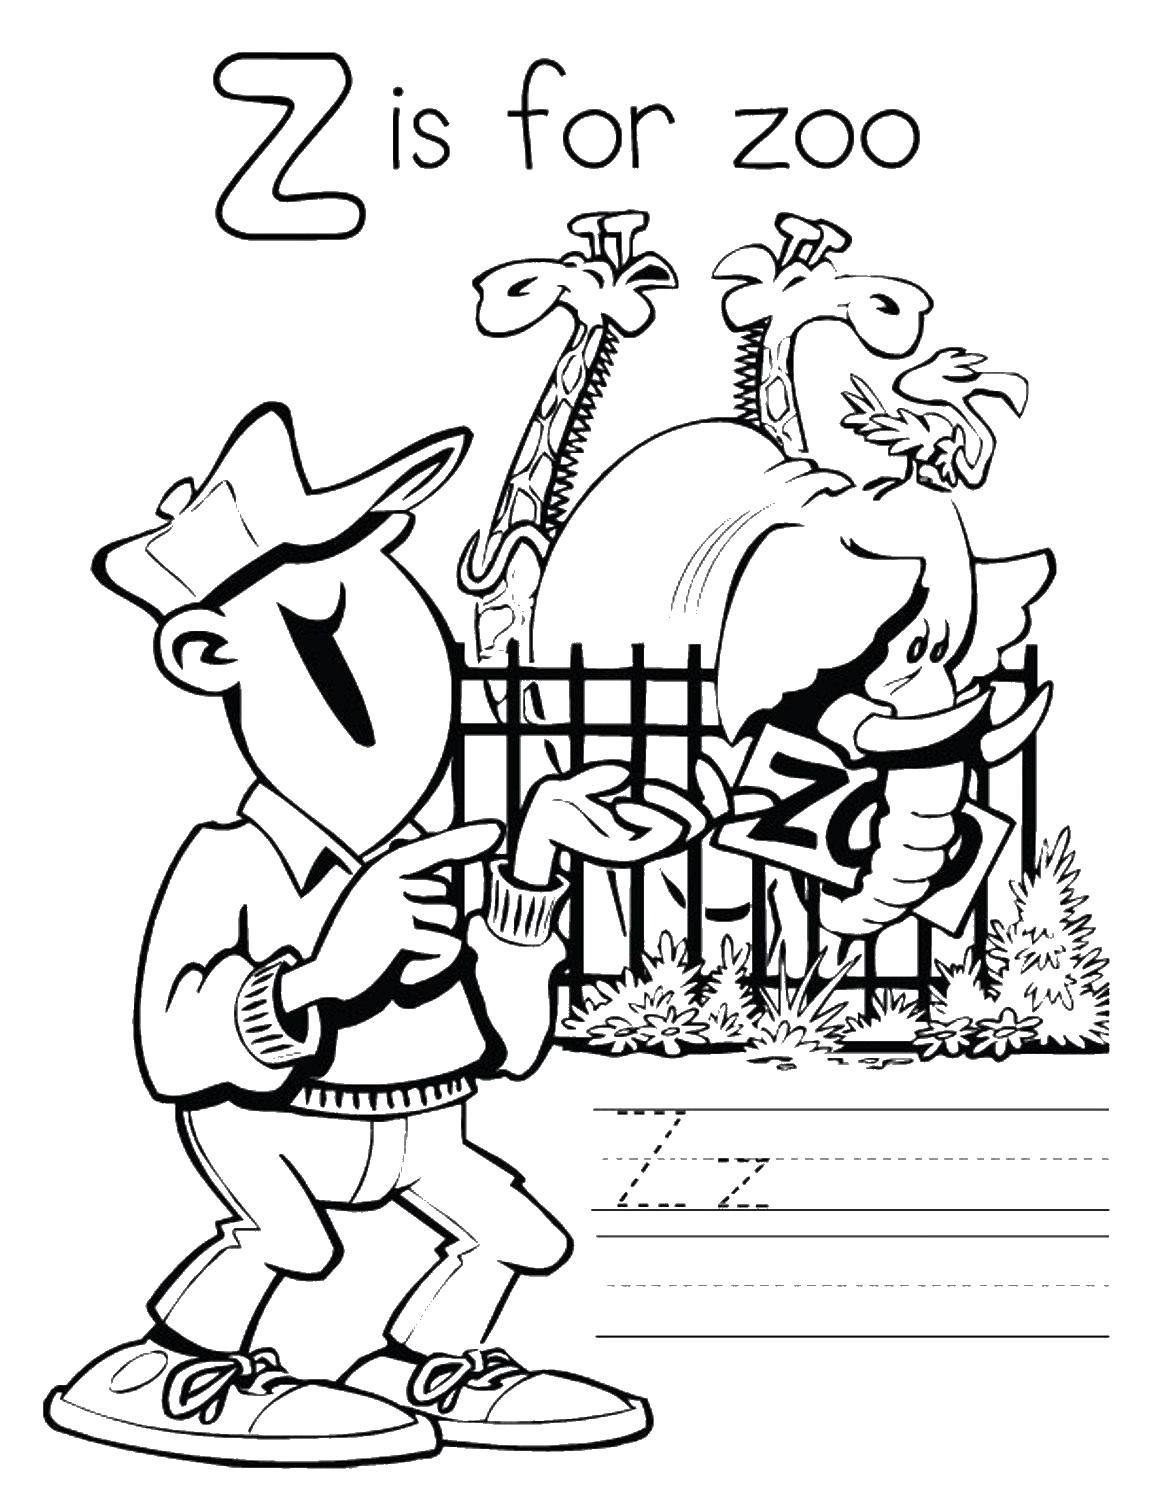 Coloring Paper zoo. Category Zoo. Tags:  the recipe, zoo.